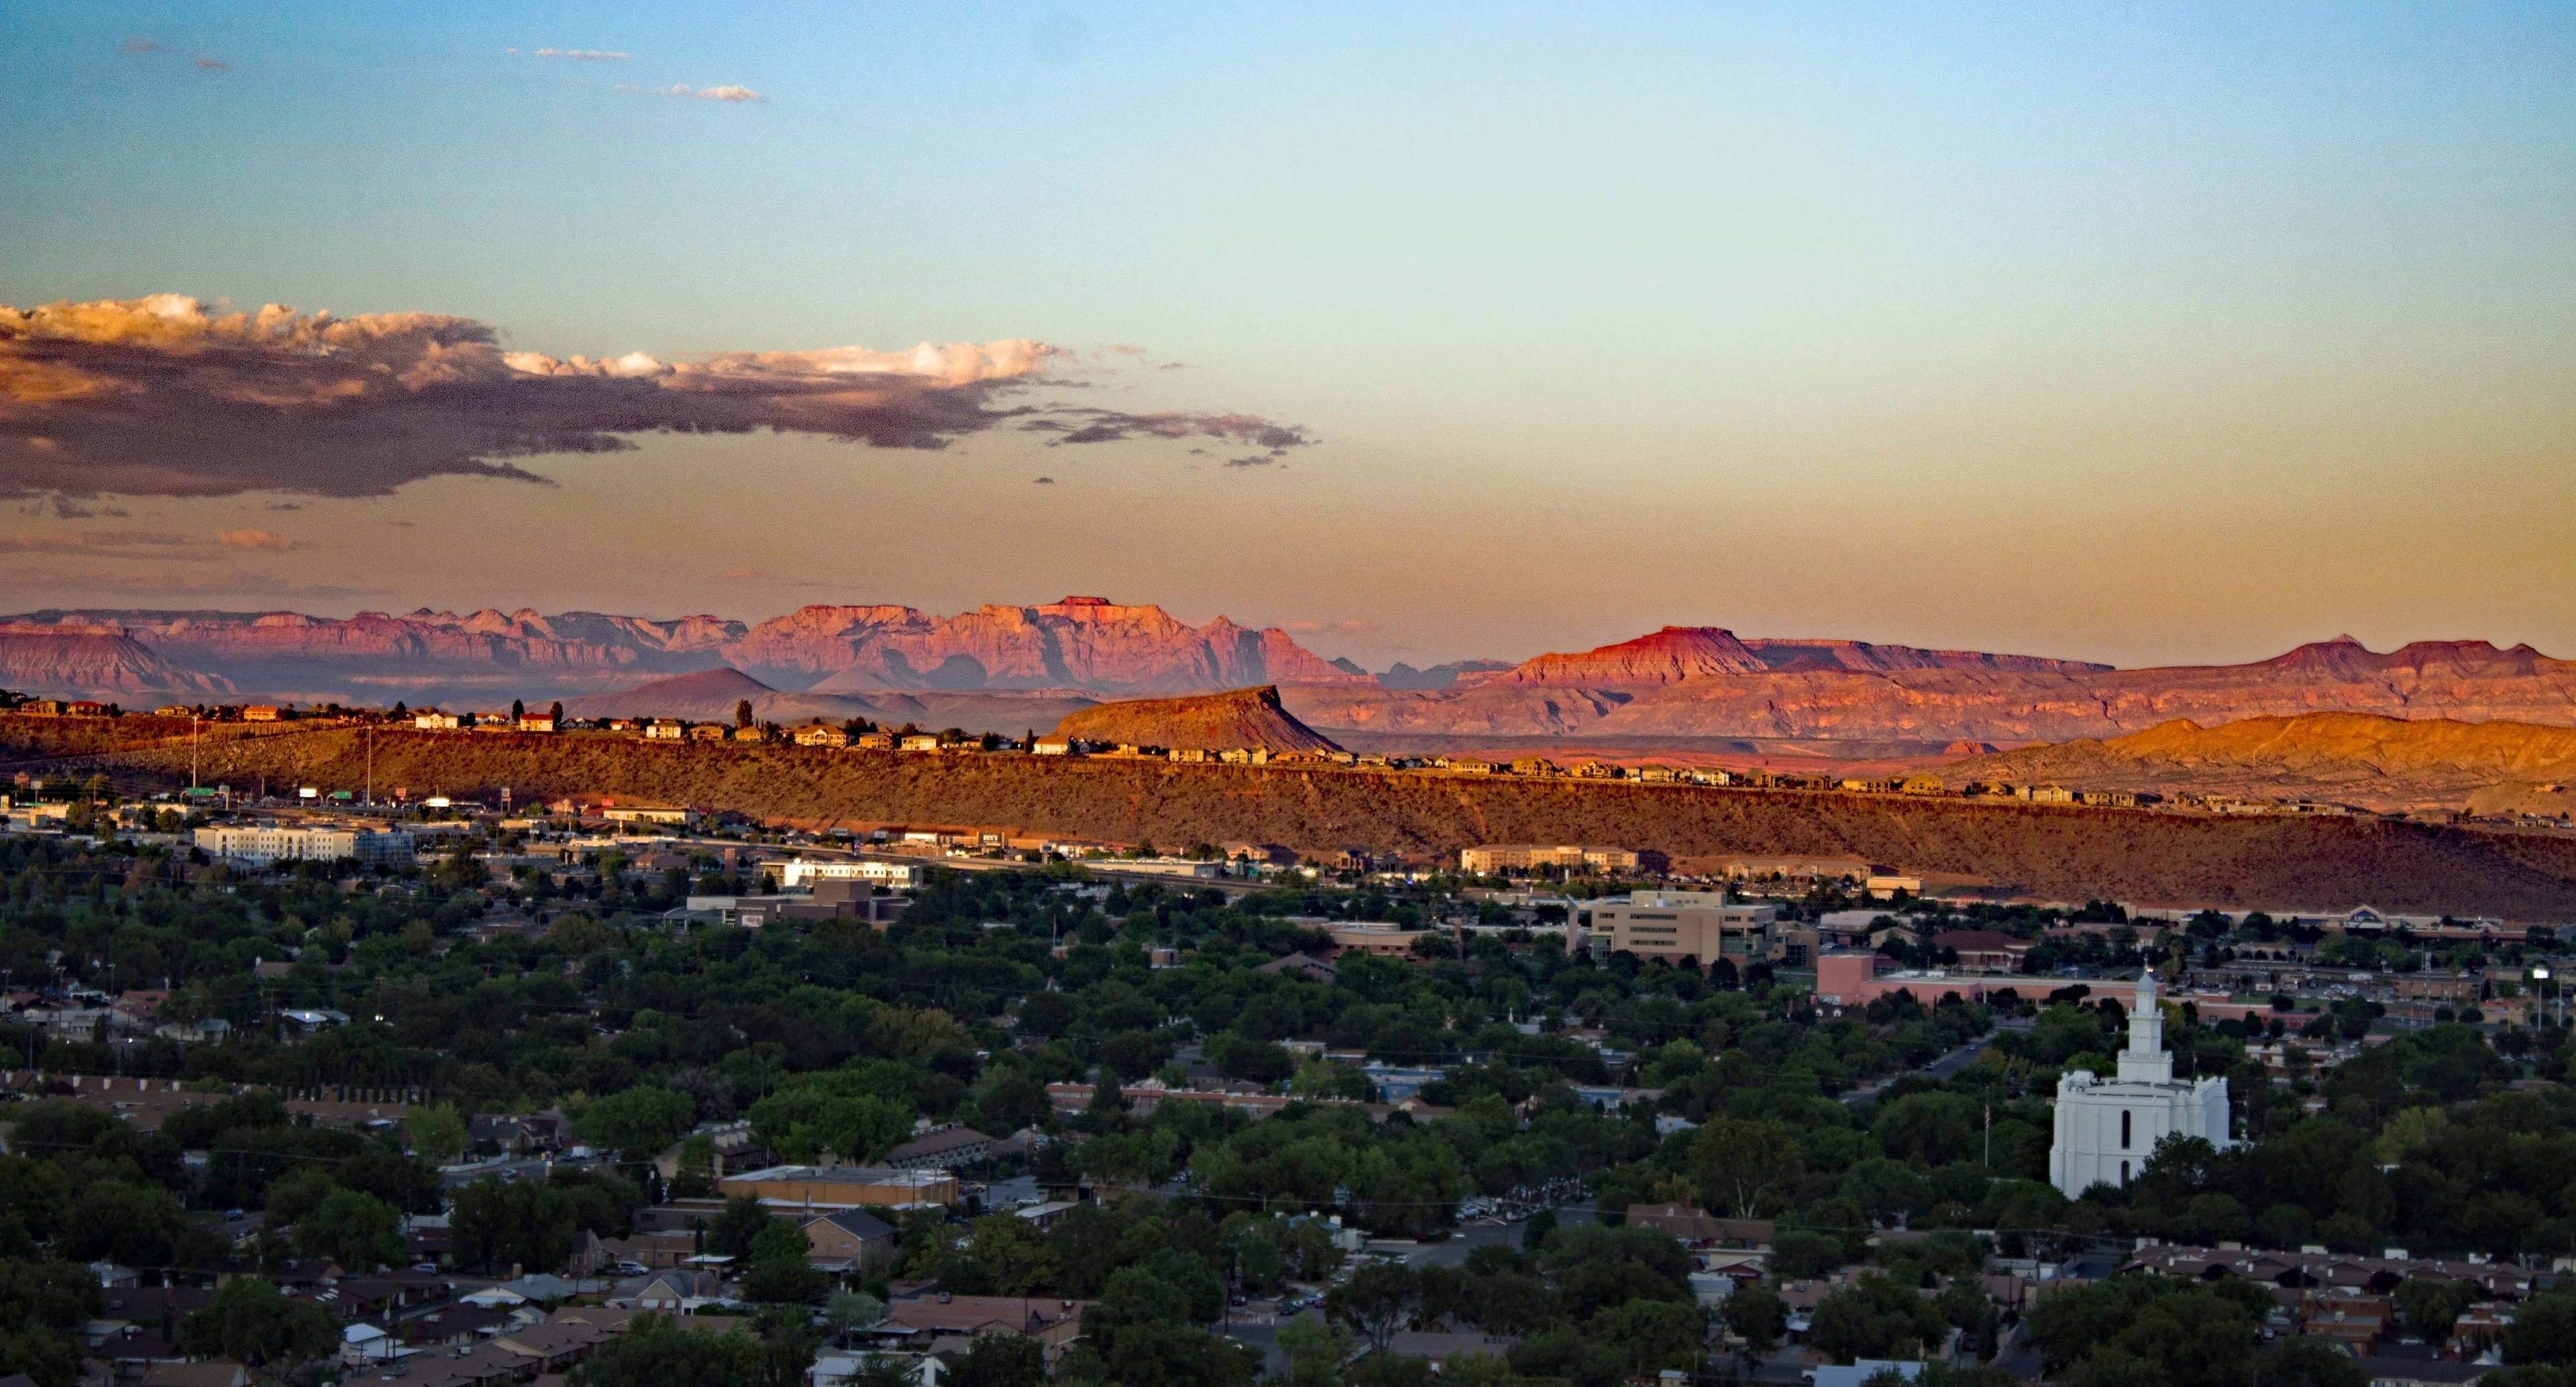 Your Second Day in St. George is Full of Engaging Destinations